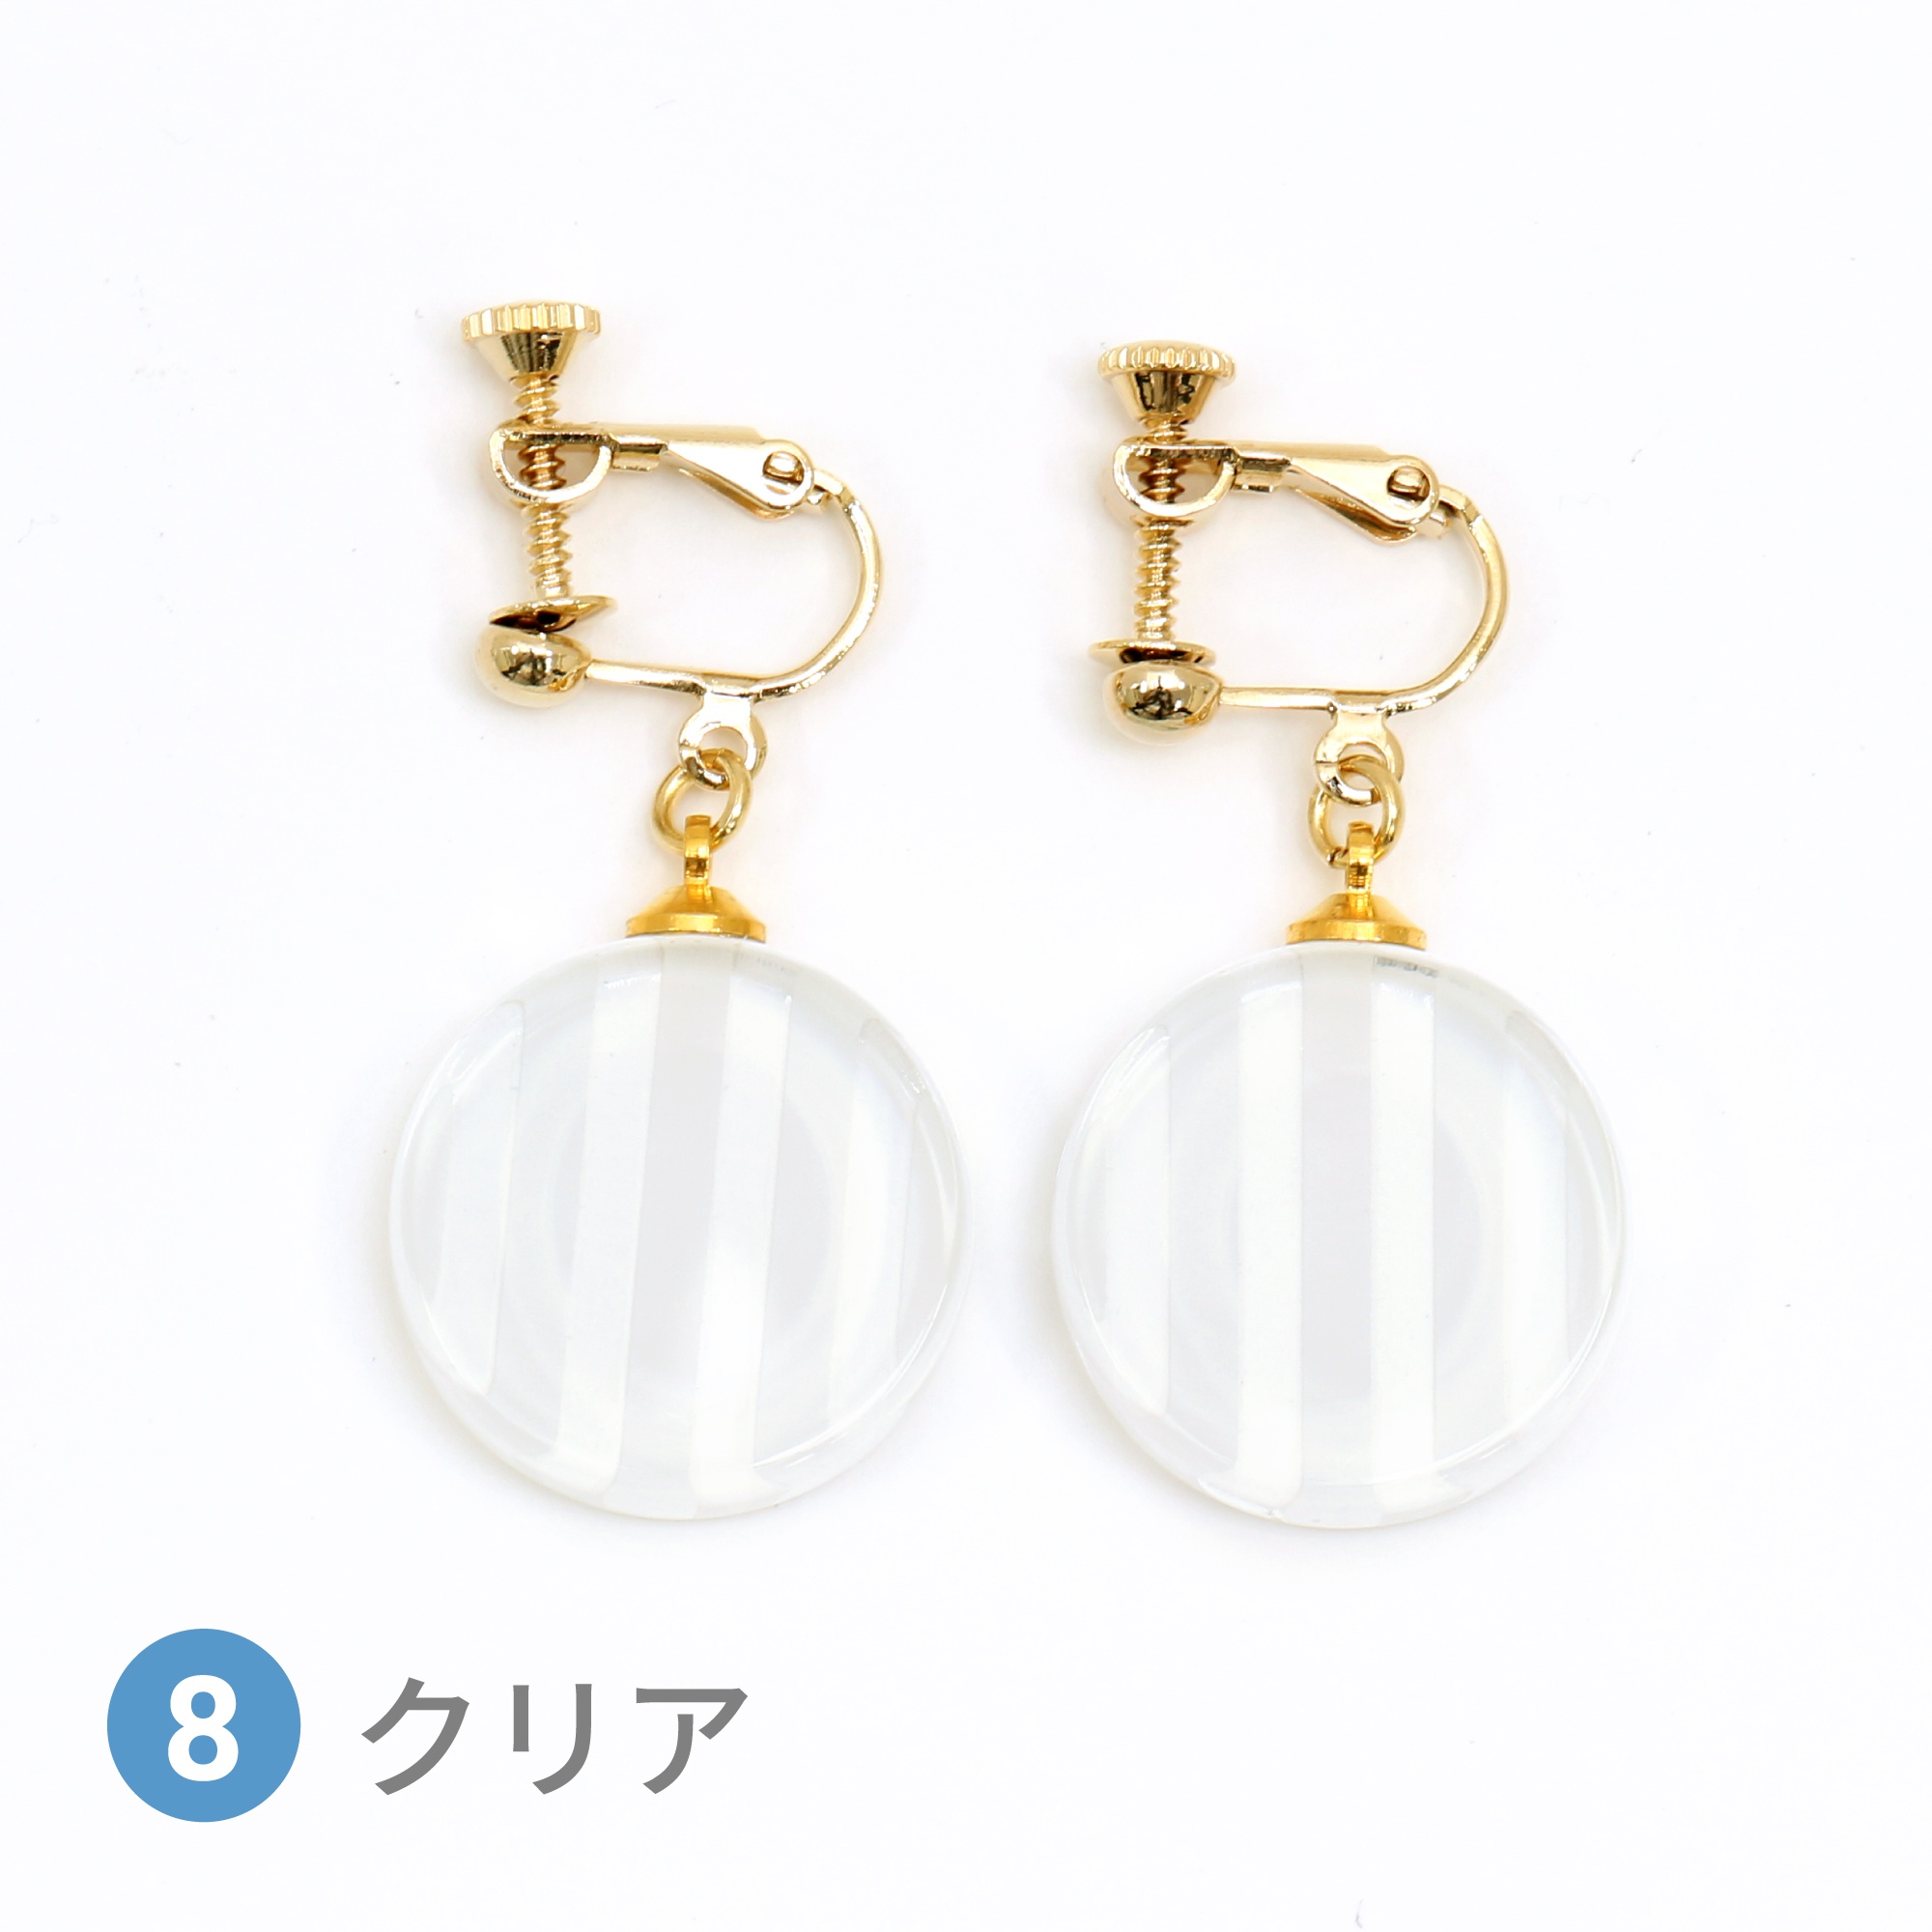 Glass accessories Earring STRIPE clear round shape